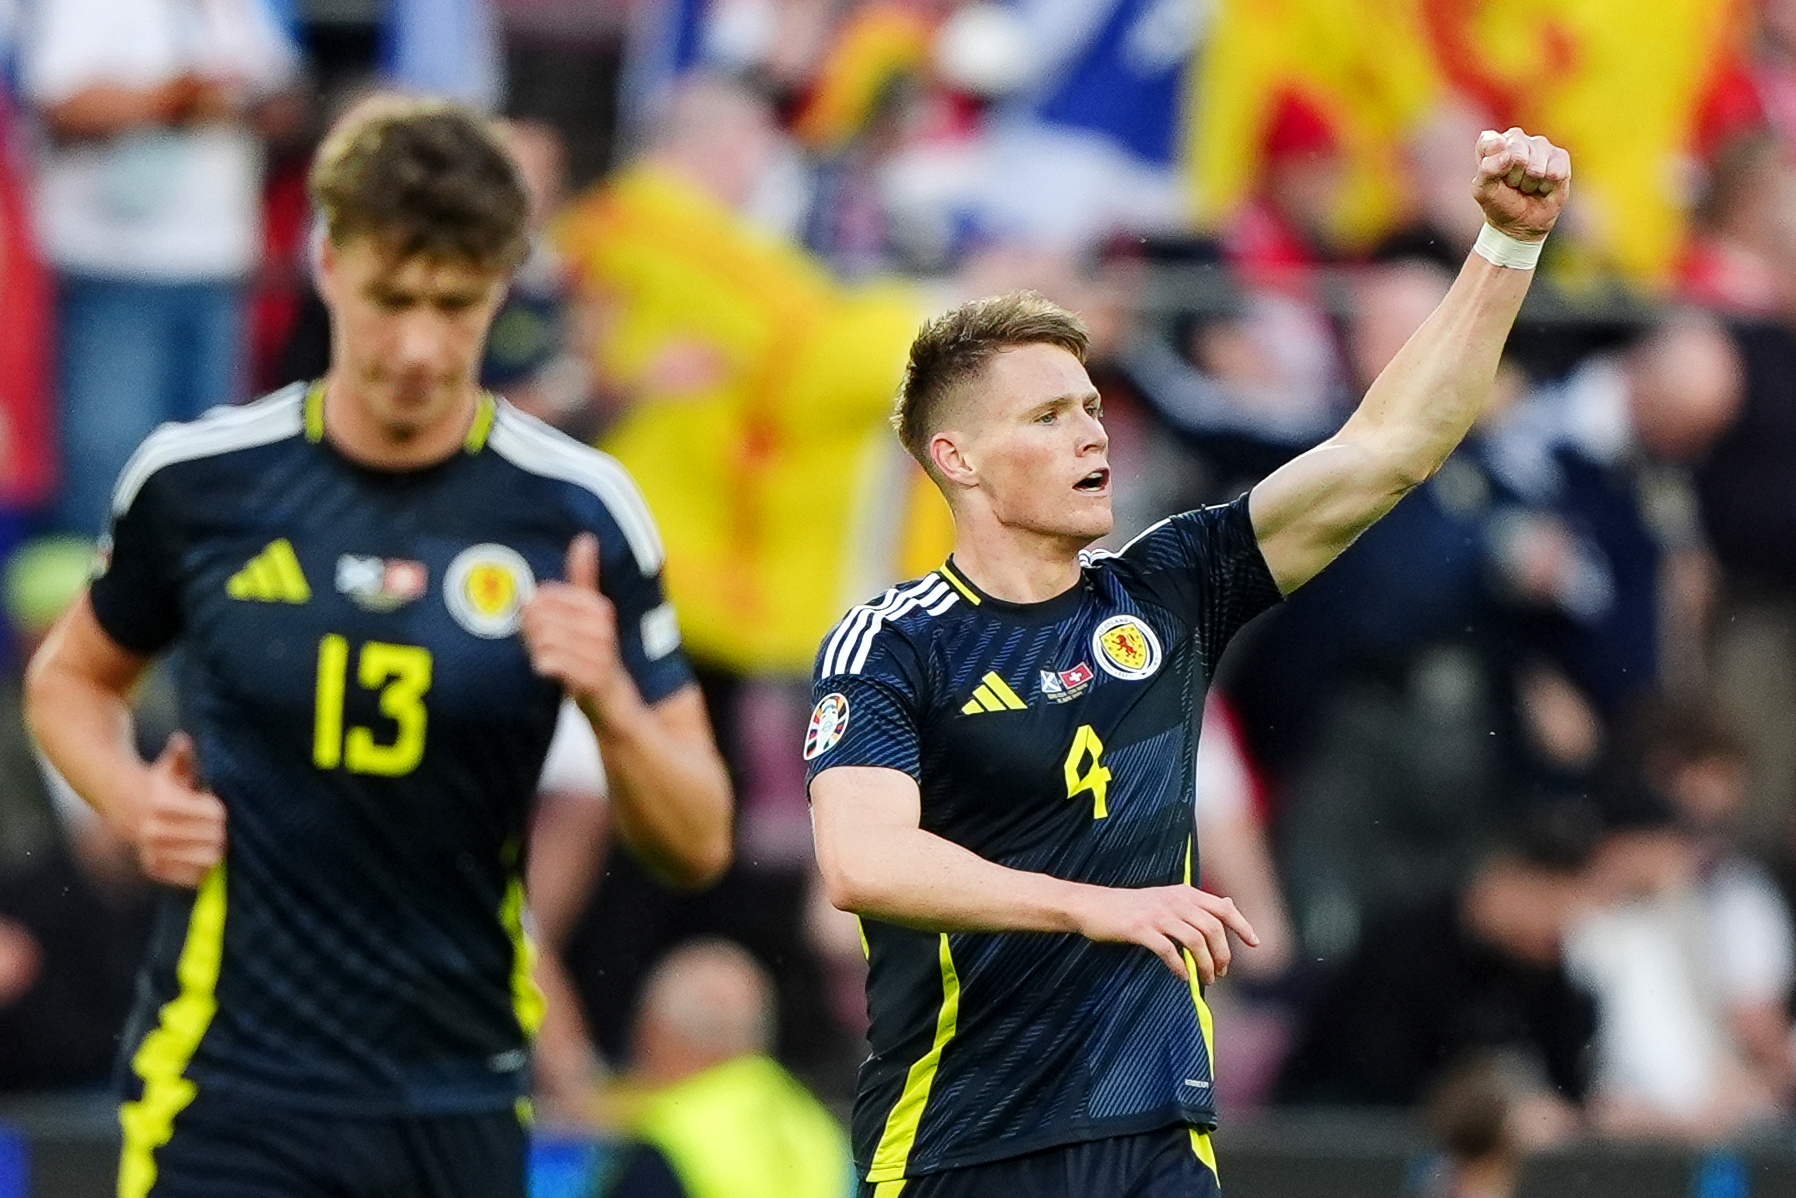 Southampton rumoured as among clubs keen on Man United's McTominay